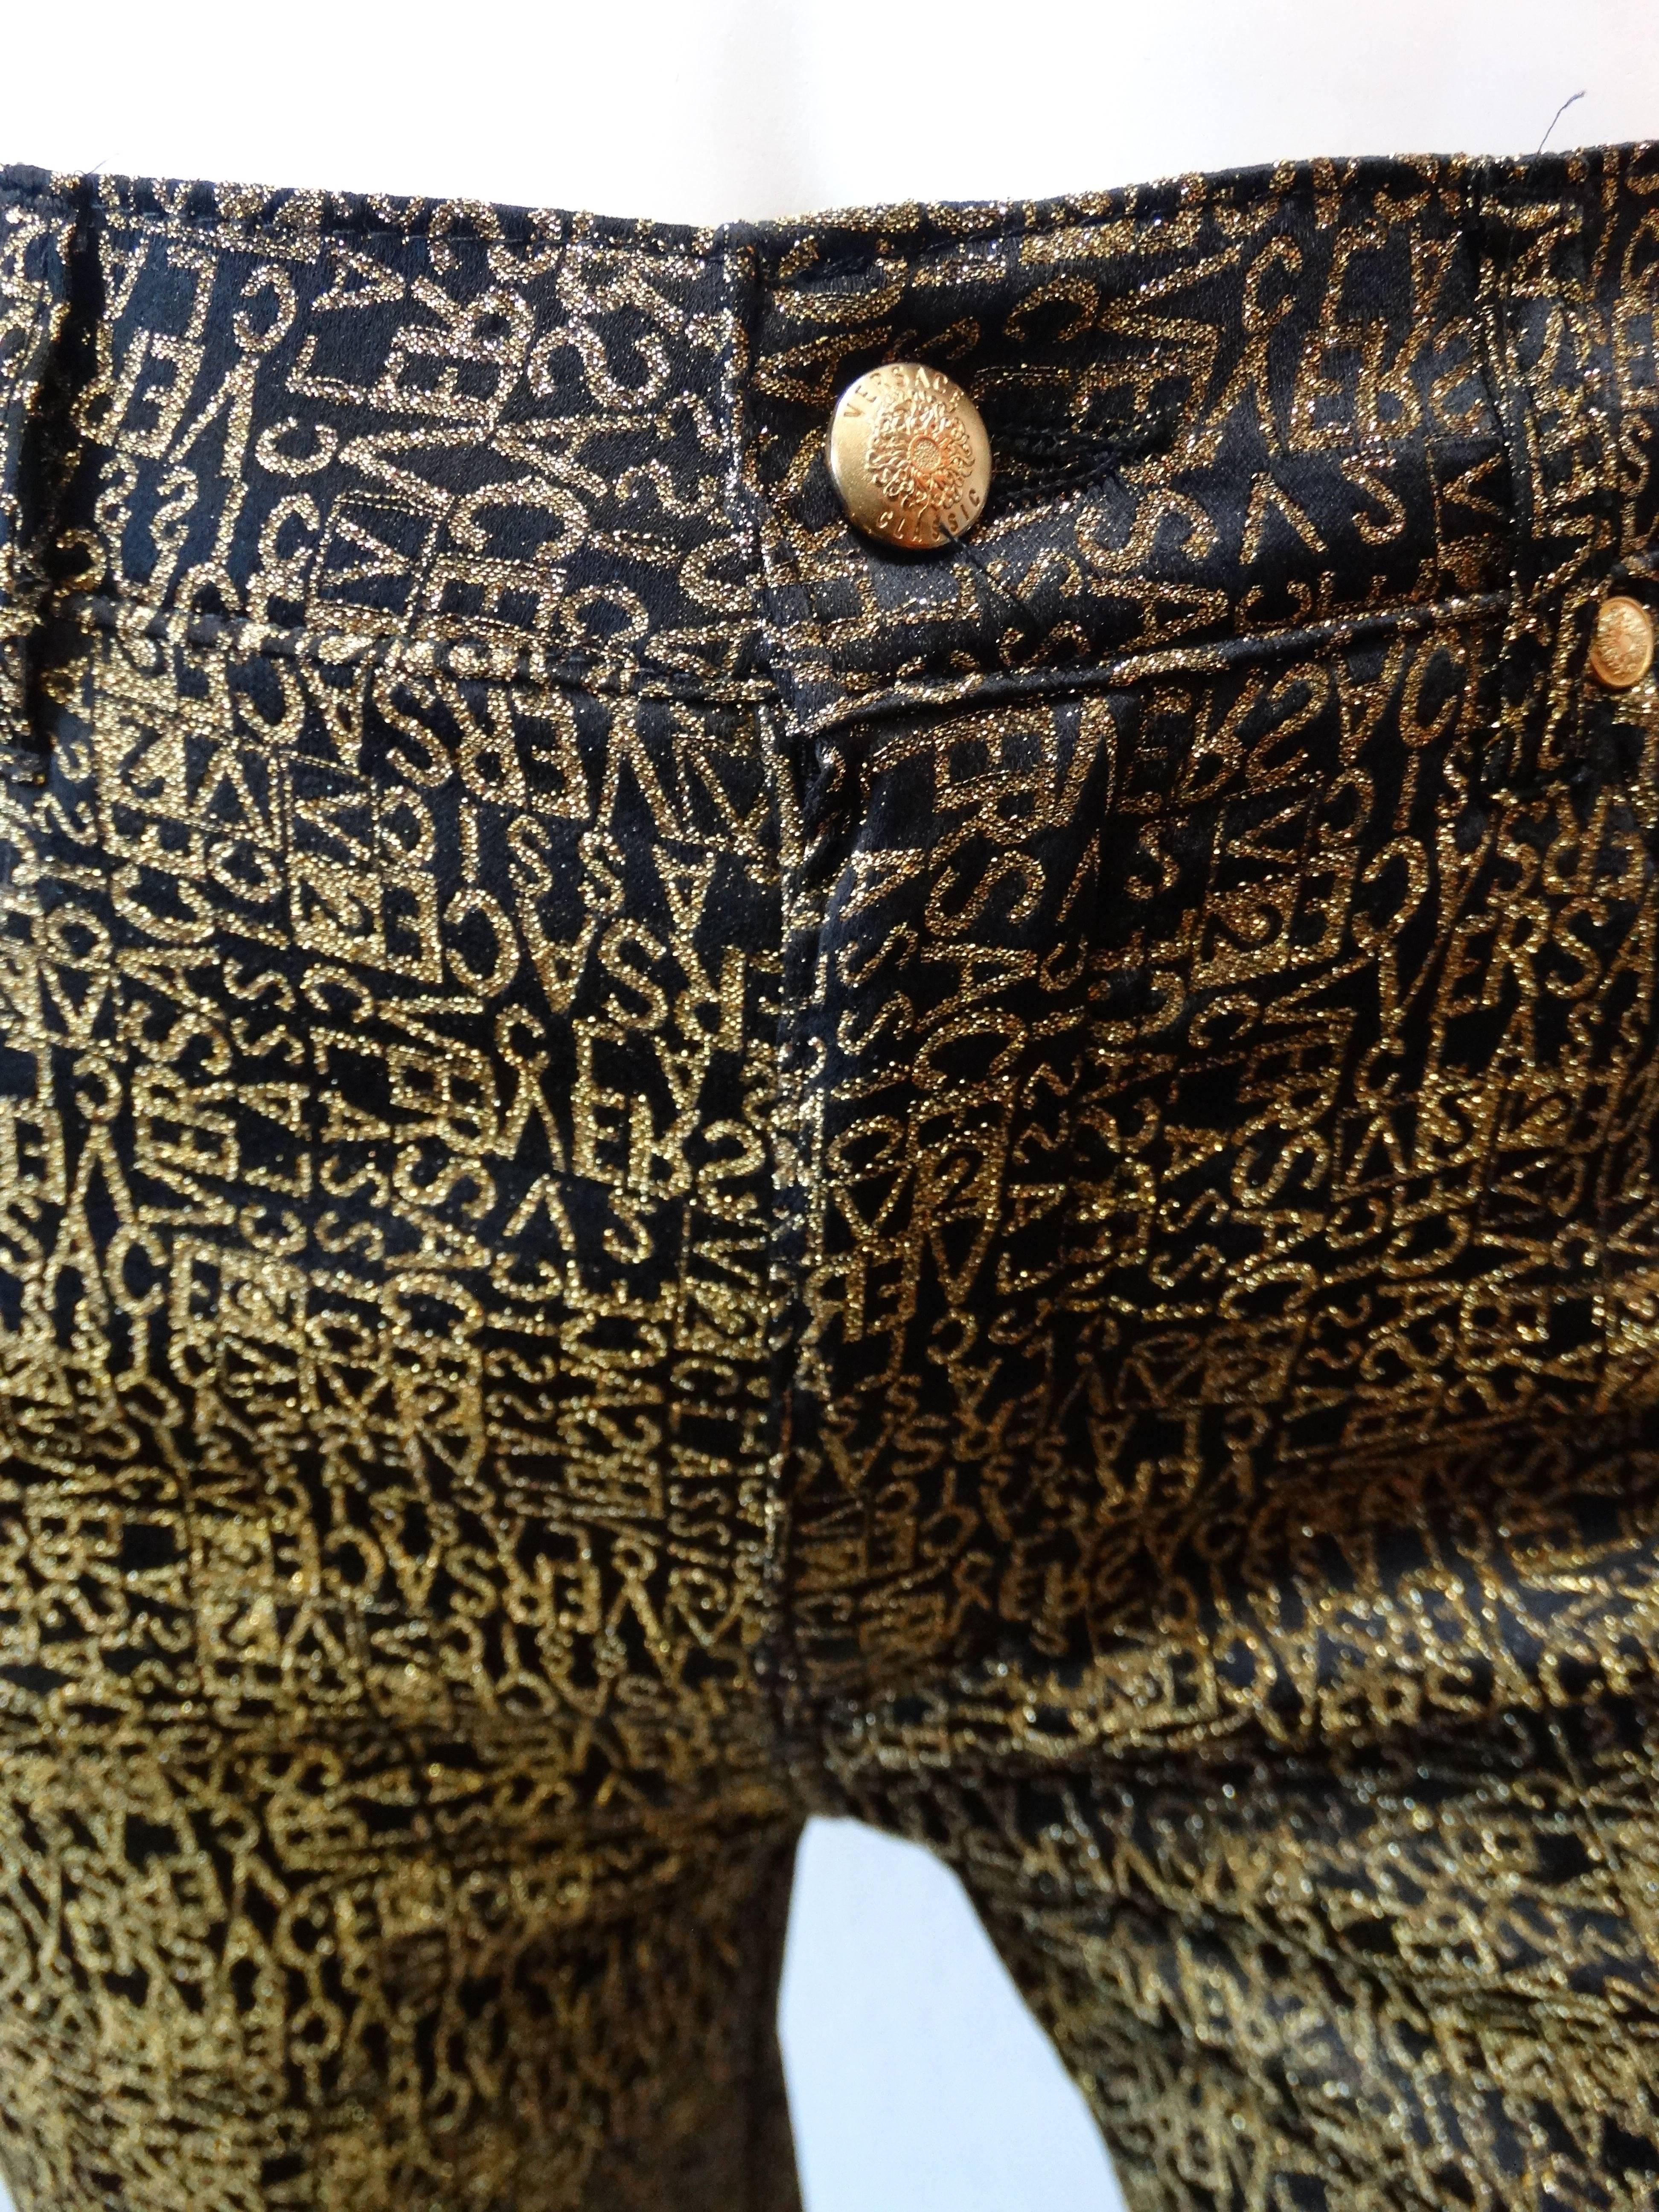 Amazing 1990s Versace monogram pants! Black and gold glitter Versace repeating print all over. Four pocket construction, clear versace patch on the back right pocket. High rise fit with a tapered leg. Zips up the front and buttons at the waist.